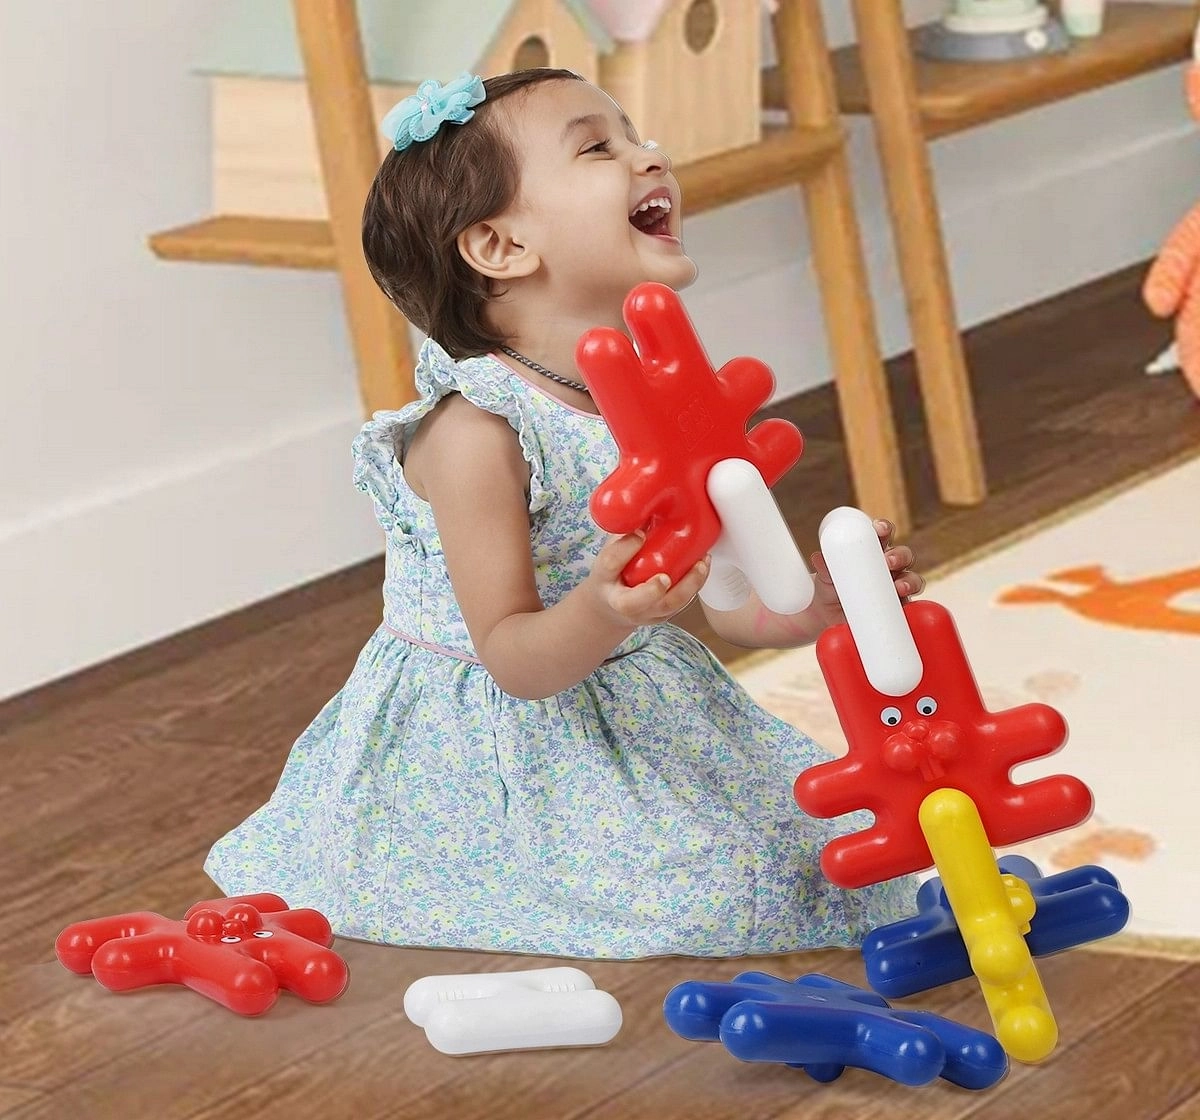 Ok Play Funny Bunny Link Interlocking blocks Early learning educational toy for kids Multicolor 0M+